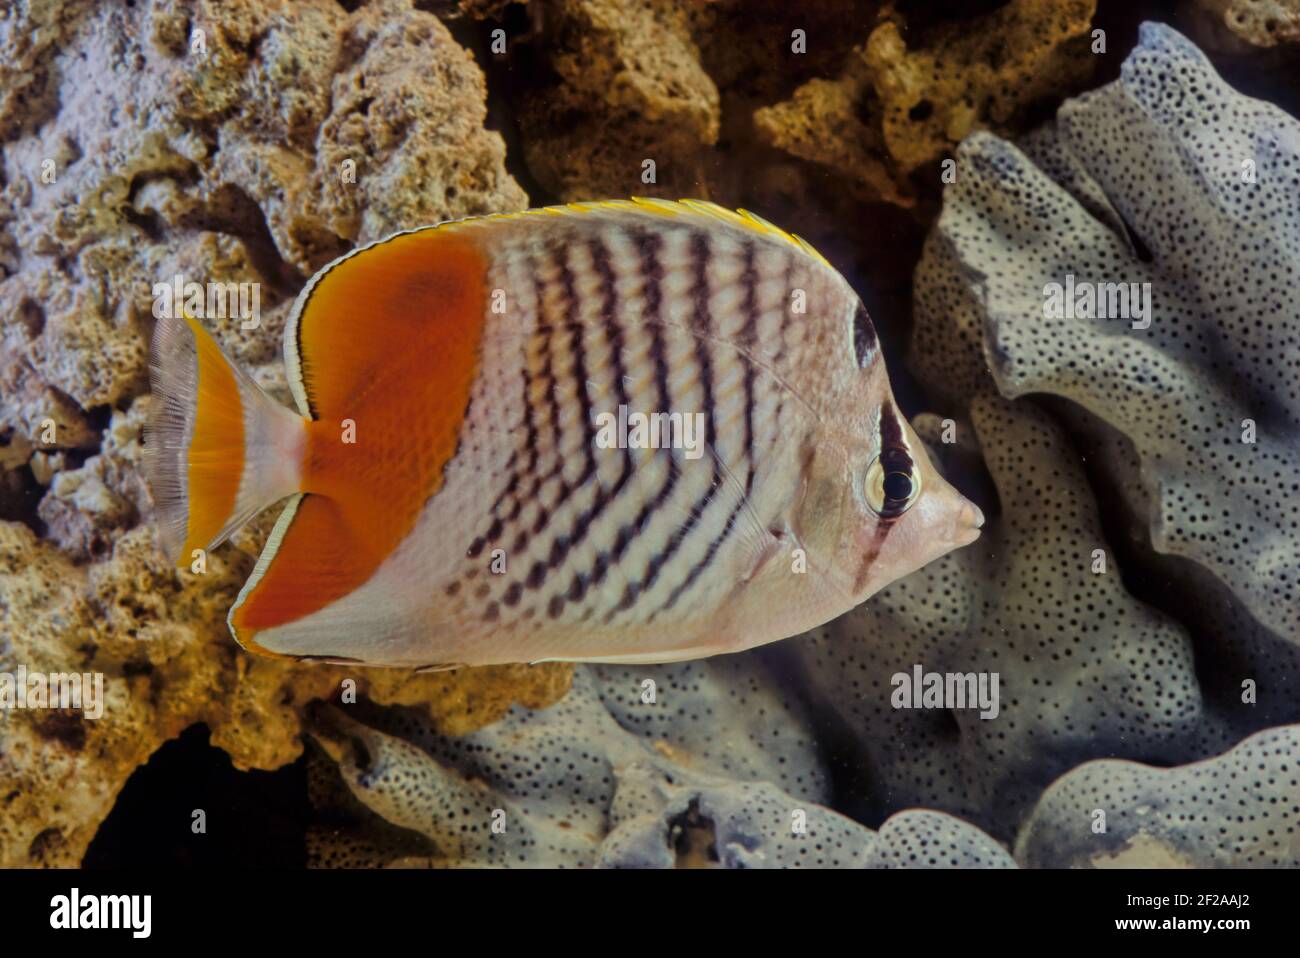 The pearlscale butterflyfish (Chaetodon xanthurus), also known as yellow-tailed butterflyfish, crosshatch butterflyfish or Philippines chevron butterf Stock Photo